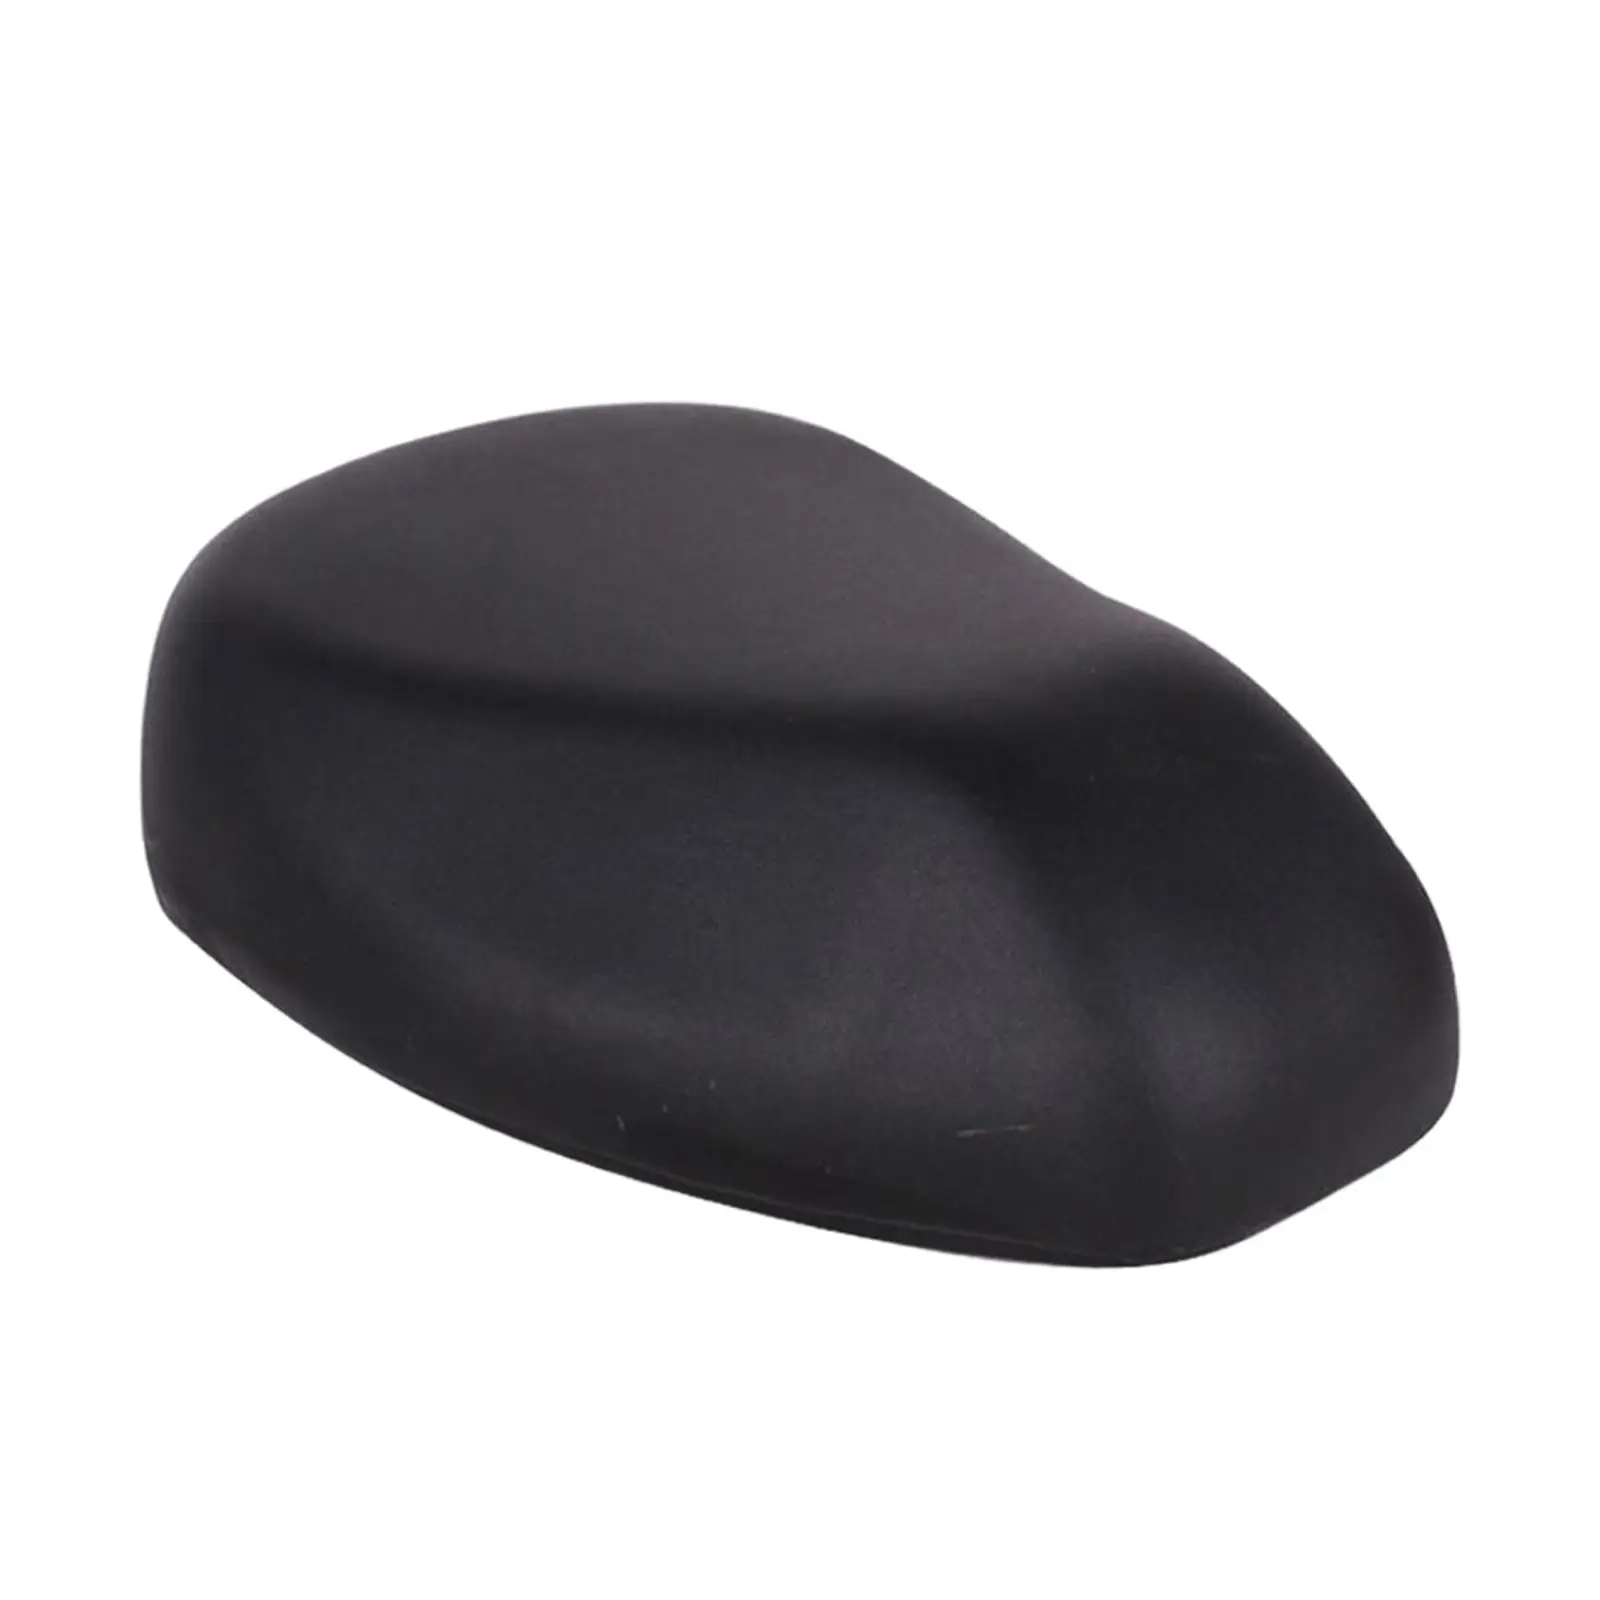 Bike Seat Cushion Replacement Saddle Firm Fit for Bicycle Electric Scooter